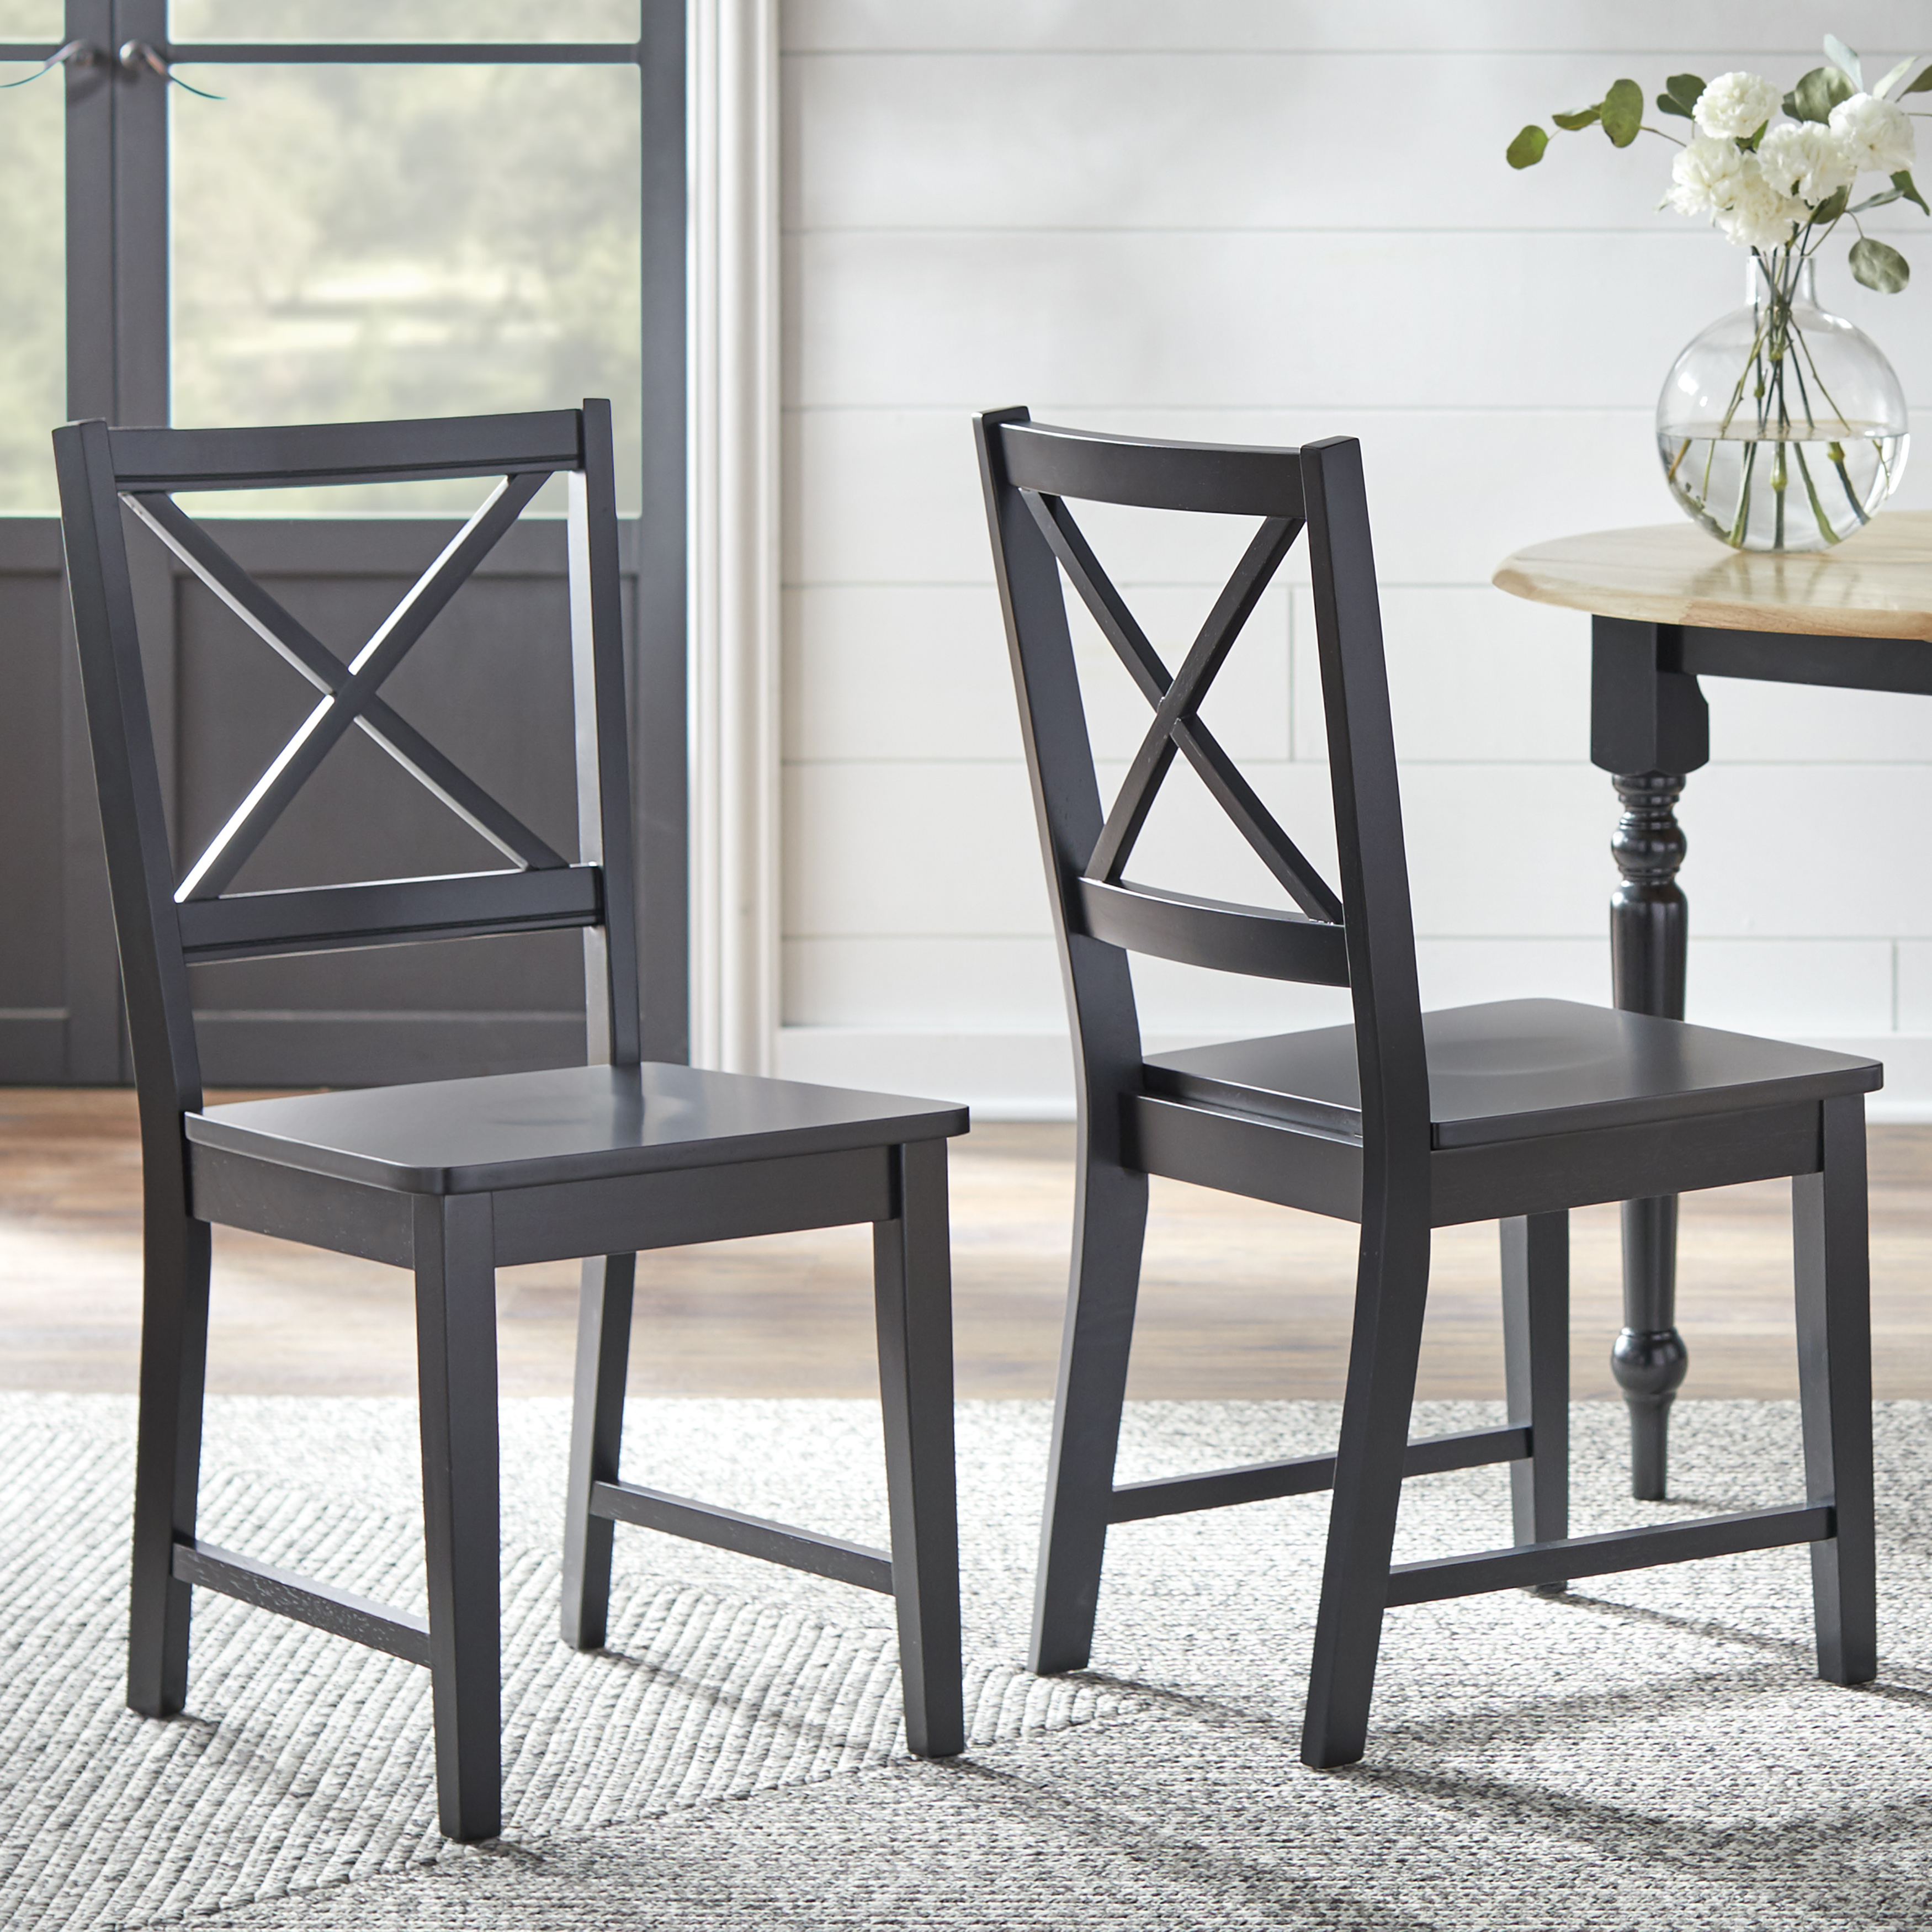 TMS Virginia Cross-Back Chair, Set of 2, Black - image 1 of 5